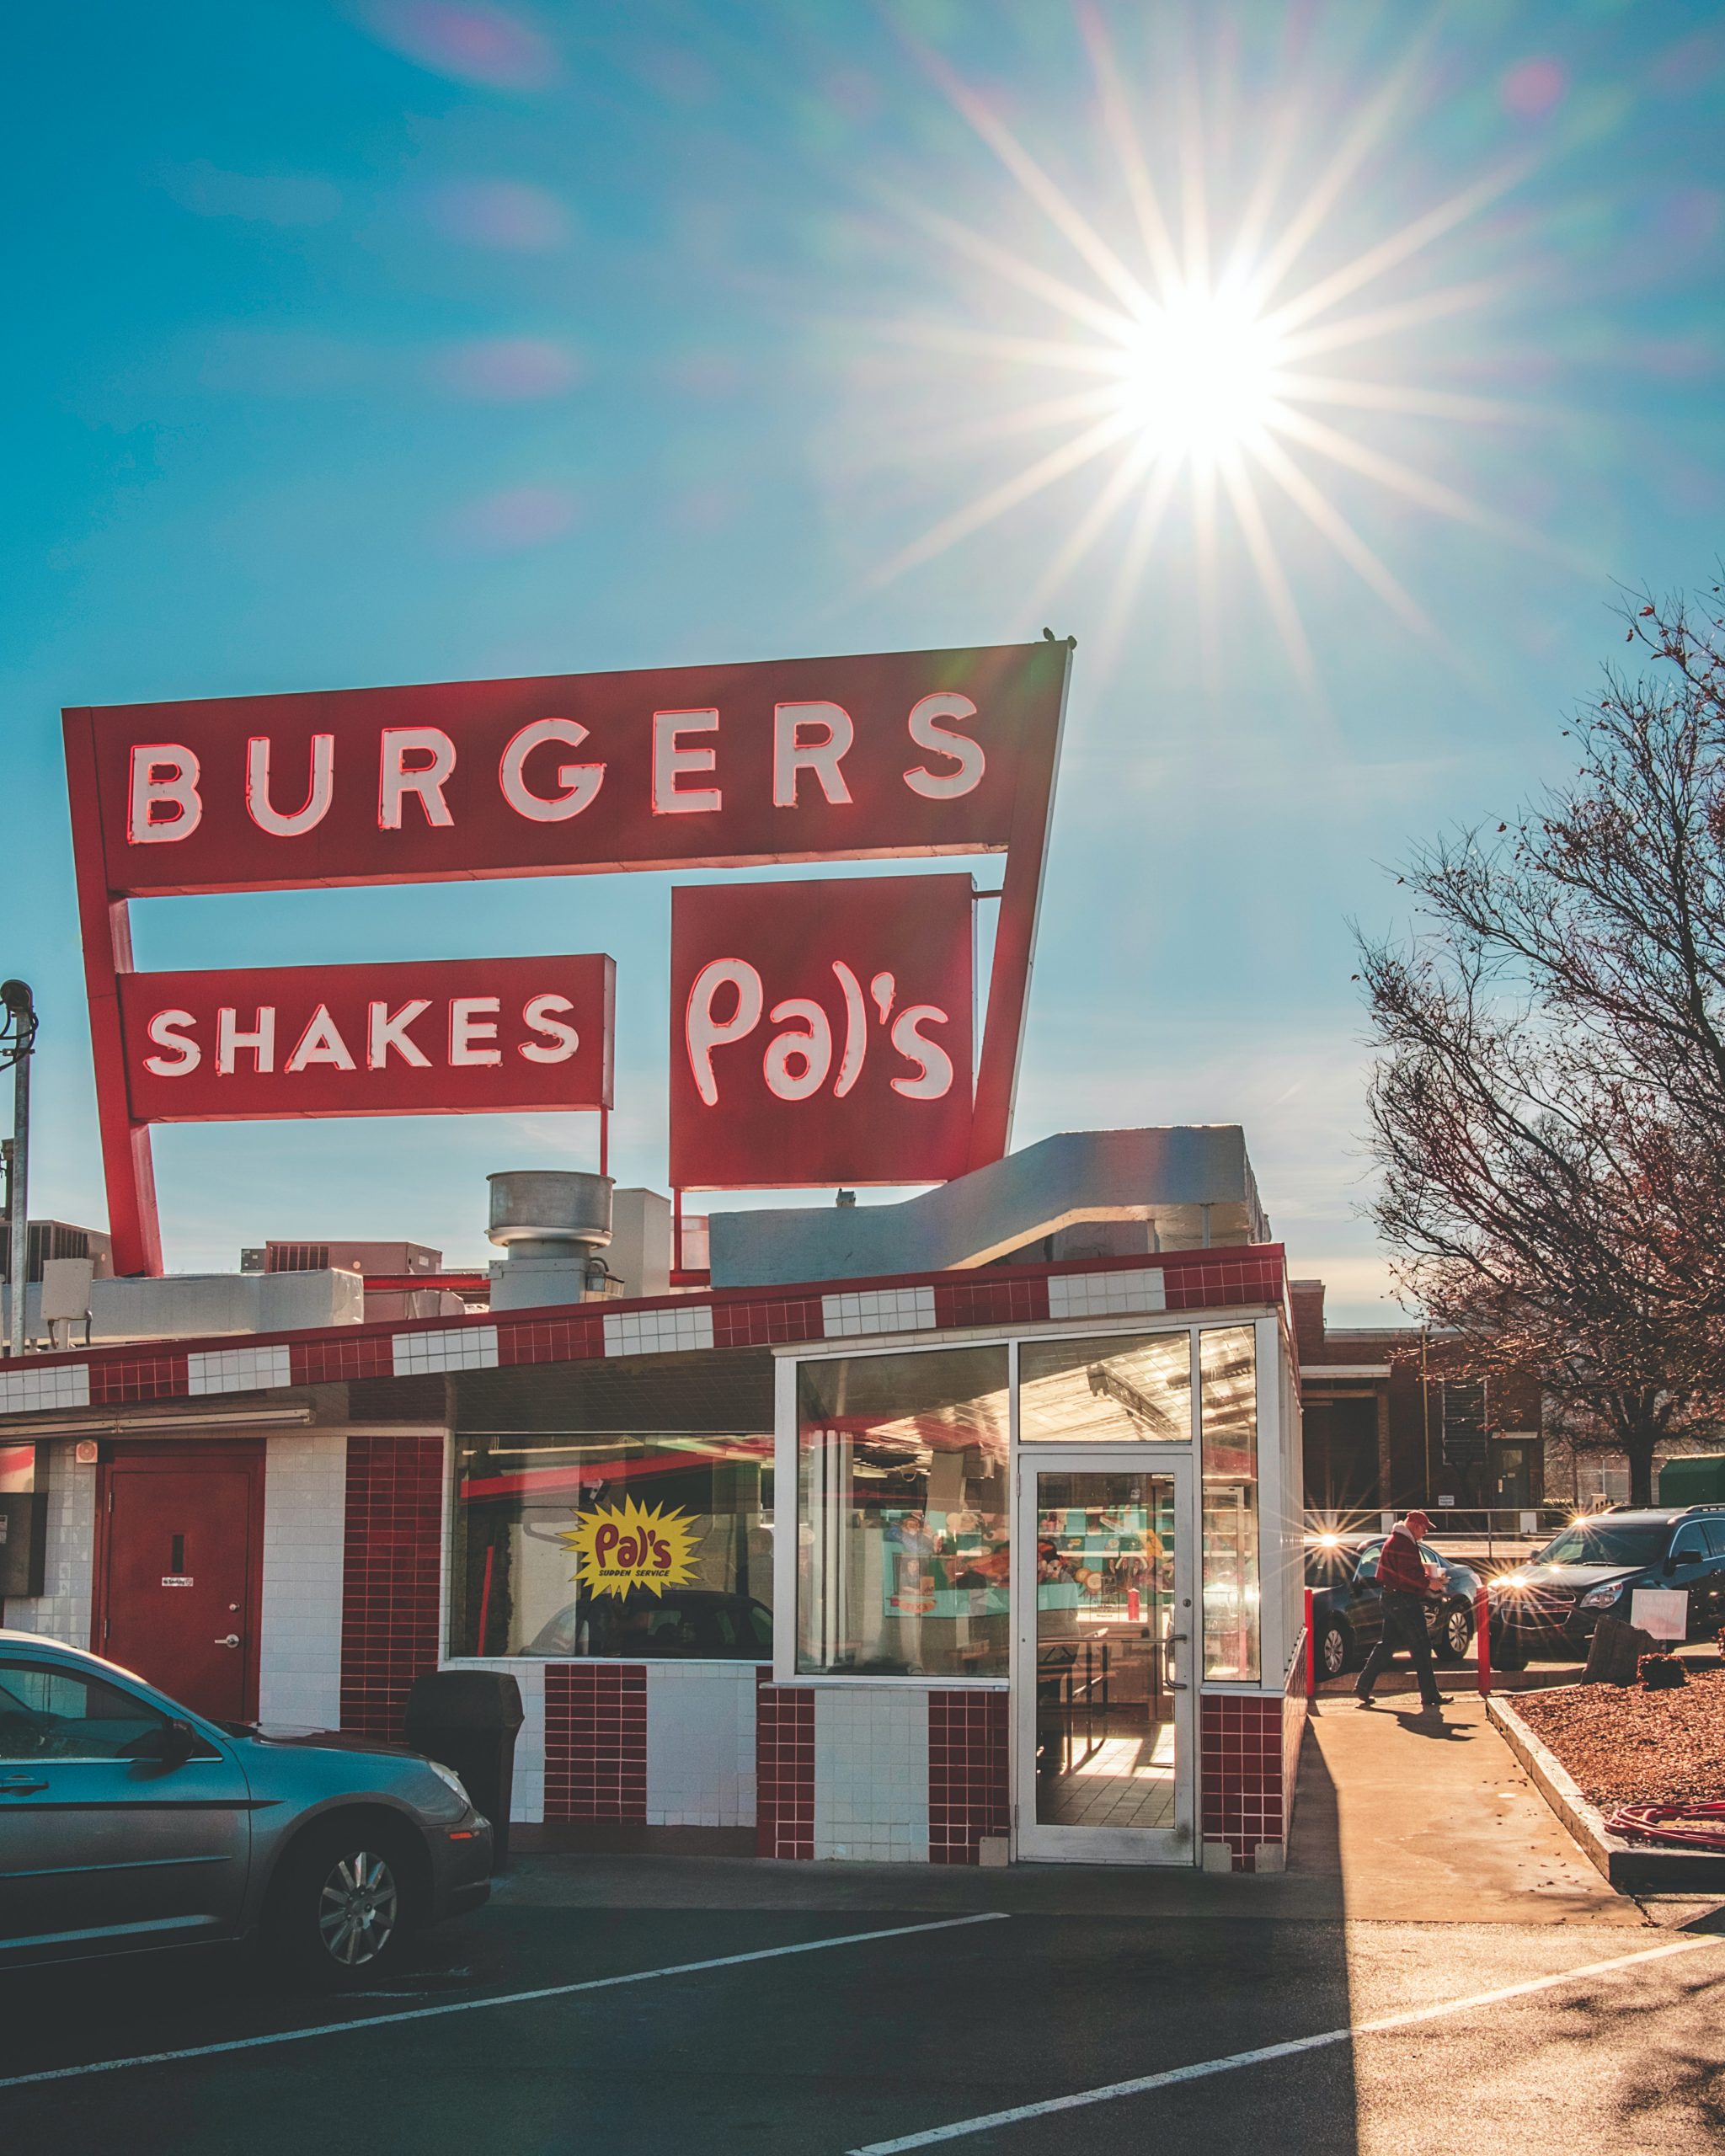 5 Key Reasons To Franchise Your Restaurant Concept